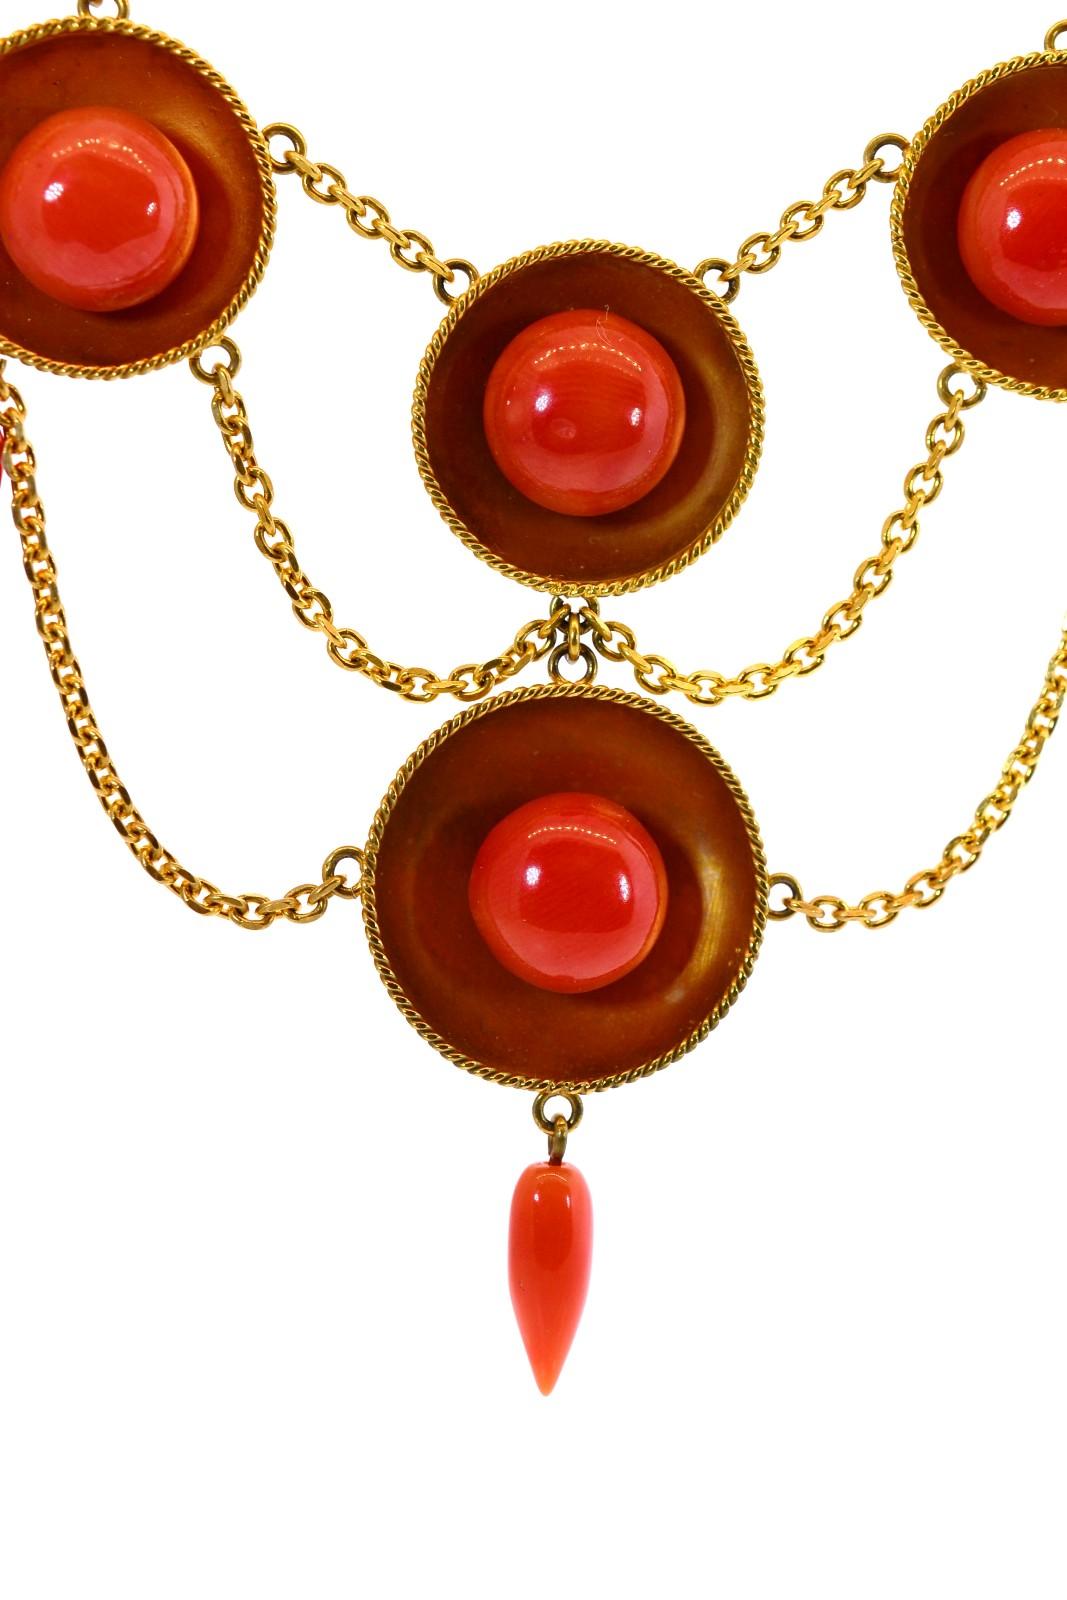 This coveted unique stunner is created in 15KT yellow gold.  The English beauty sports 8 discs each with a deep salmon color Coral button.  Seven tear shaped cords add movement to this already supple, gorgeous 17 1/4 inch long necklace.  Circa 1890s.